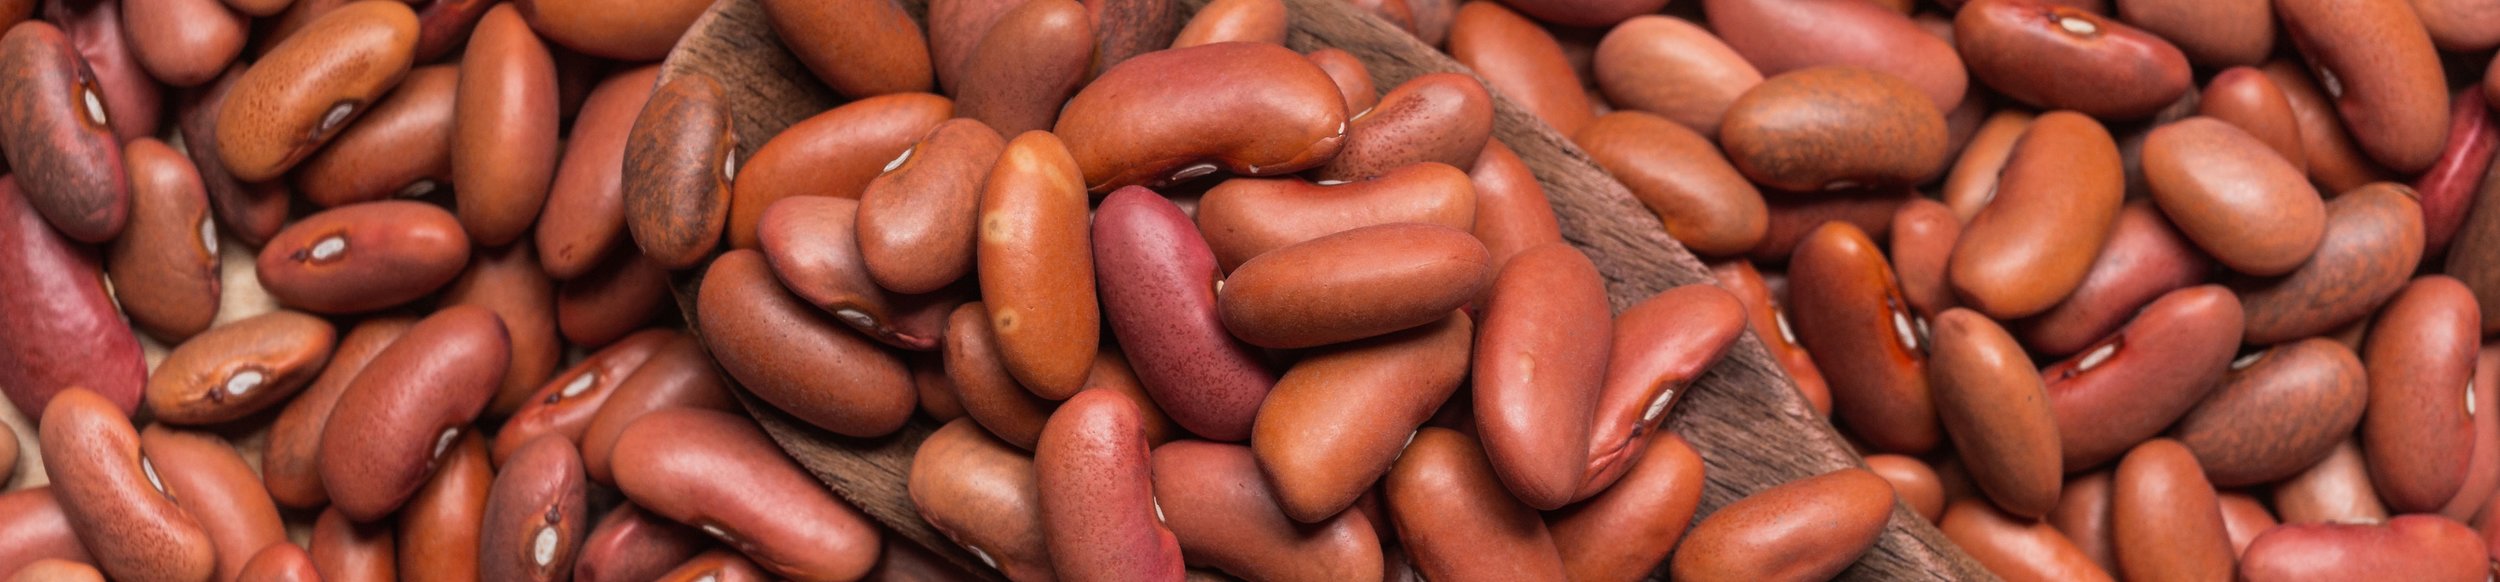 Light red kidney beans are perfect for soups, stews and other dishes that cook for longer periods.